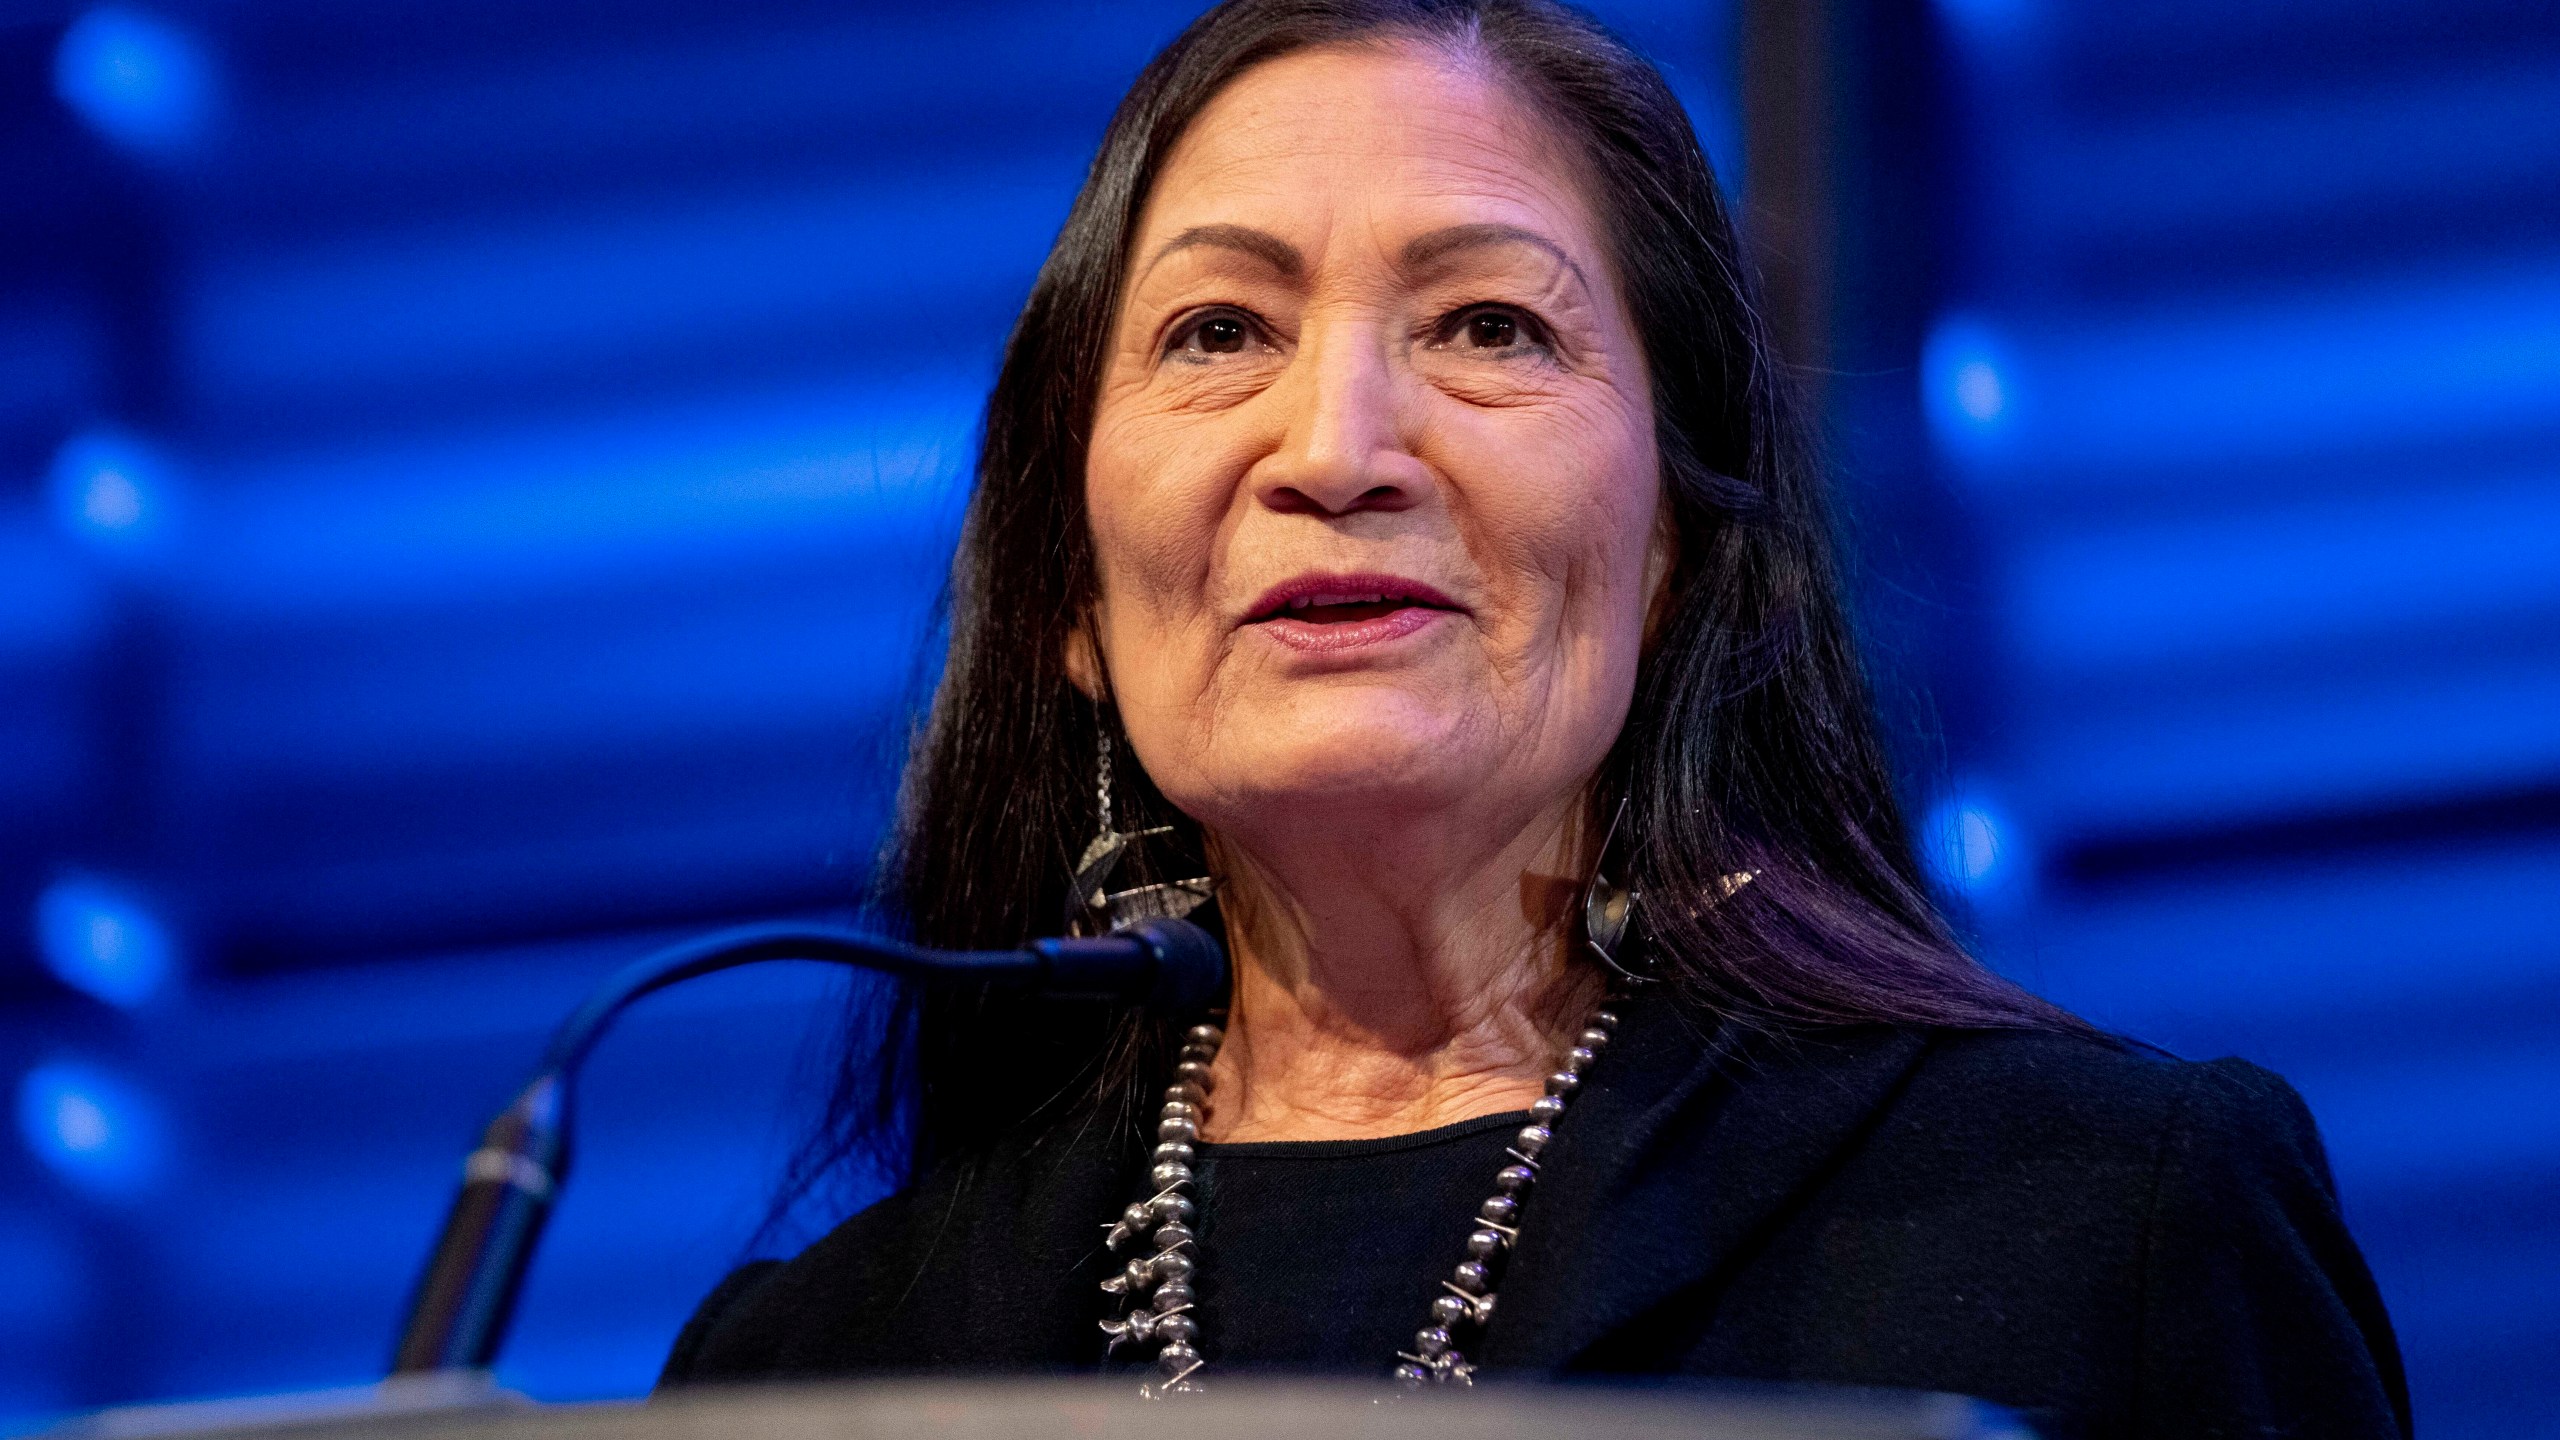 FILE - Interior Secretary Deb Haaland announces that her agency will work to restore more large bison herds during a speech for World Wildlife Day at the National Geographic Society in Washington, Friday, March 3, 2023. The Biden administration issued a final rule Wednesday, March 27, 2024, aimed at curbing methane leaks from oil and gas drilling on federal and tribal lands, its latest action to crack down on emissions of methane, a potent greenhouse gas that contributes significantly to global warming. (AP Photo/Andrew Harnik, File)